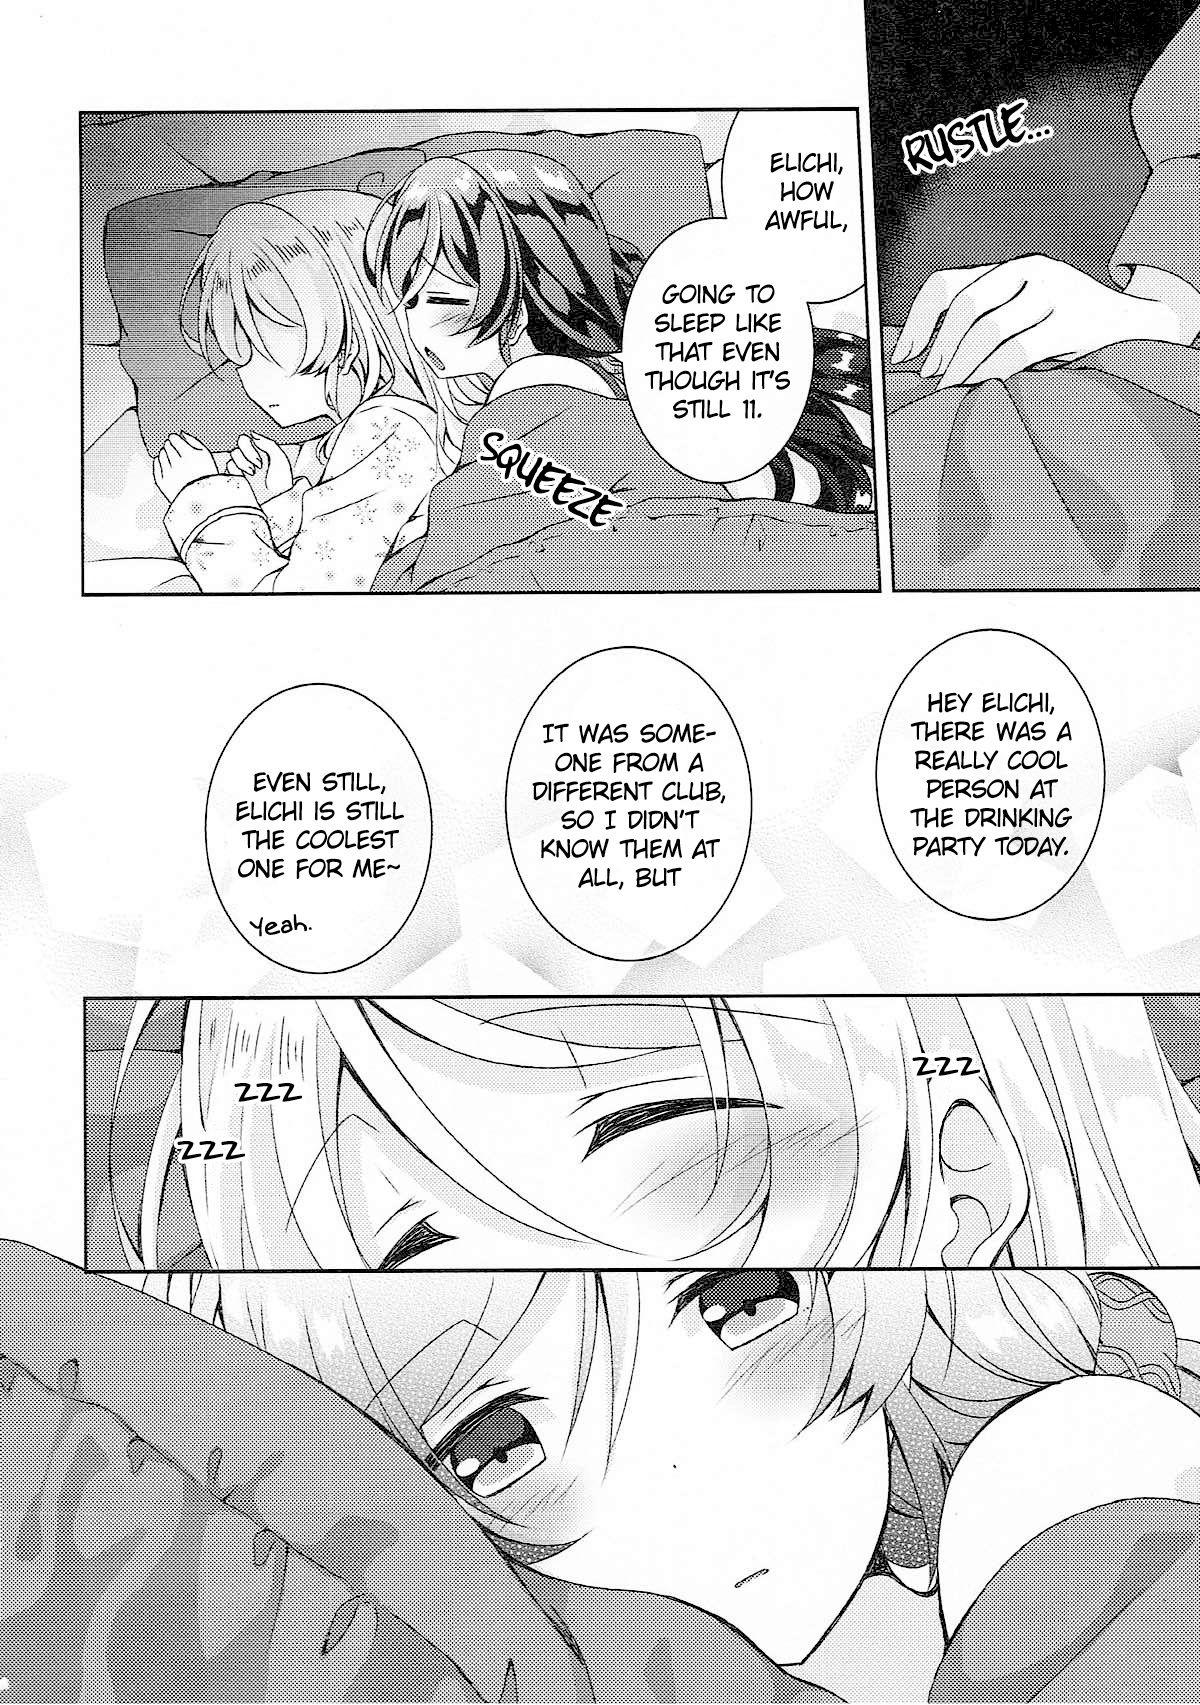 Pussy Orgasm Sex to Uso to Yurikago to | Sex, Pretend, and Cradle - Love live Male - Page 3